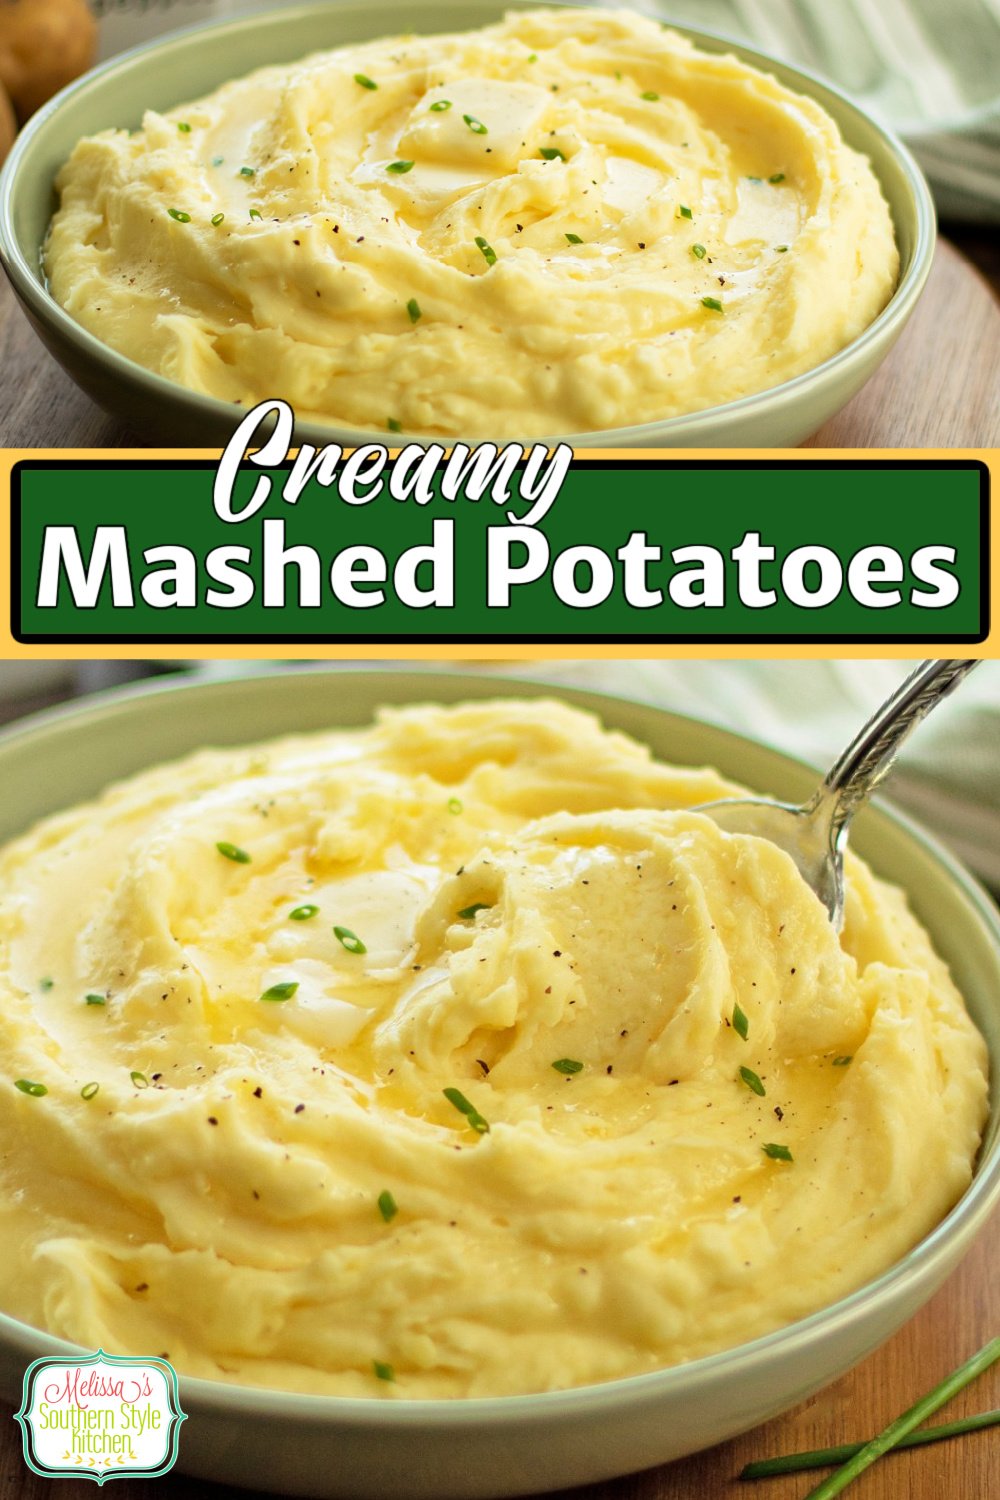 This Easy Mashed Potatoes recipe is a buttery amalgamation of perfectly cooked Yukon gold potatoes ideal for any occasion. #easymashedpotatoes #mashedpotatorecipes #thanksgivingrecipes #easterecipes #southernrecipes #sourcreampotatoes #mashedpotatorecipe via @melissasssk